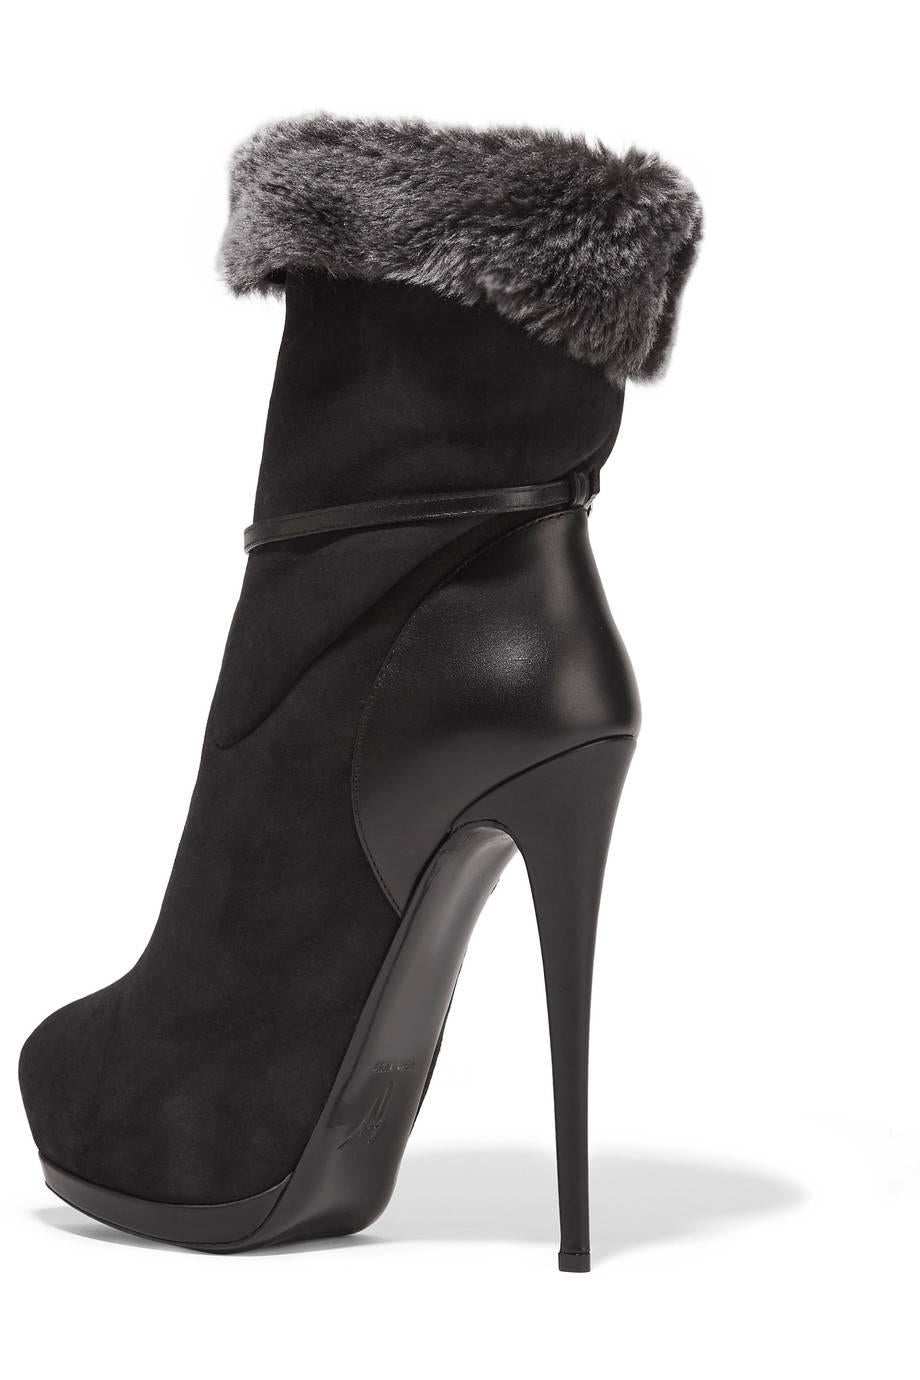 Women's Giuseppe Zanotti NEW & SOLD OUT Black Suede Leather Fur Booties Shoes in Box